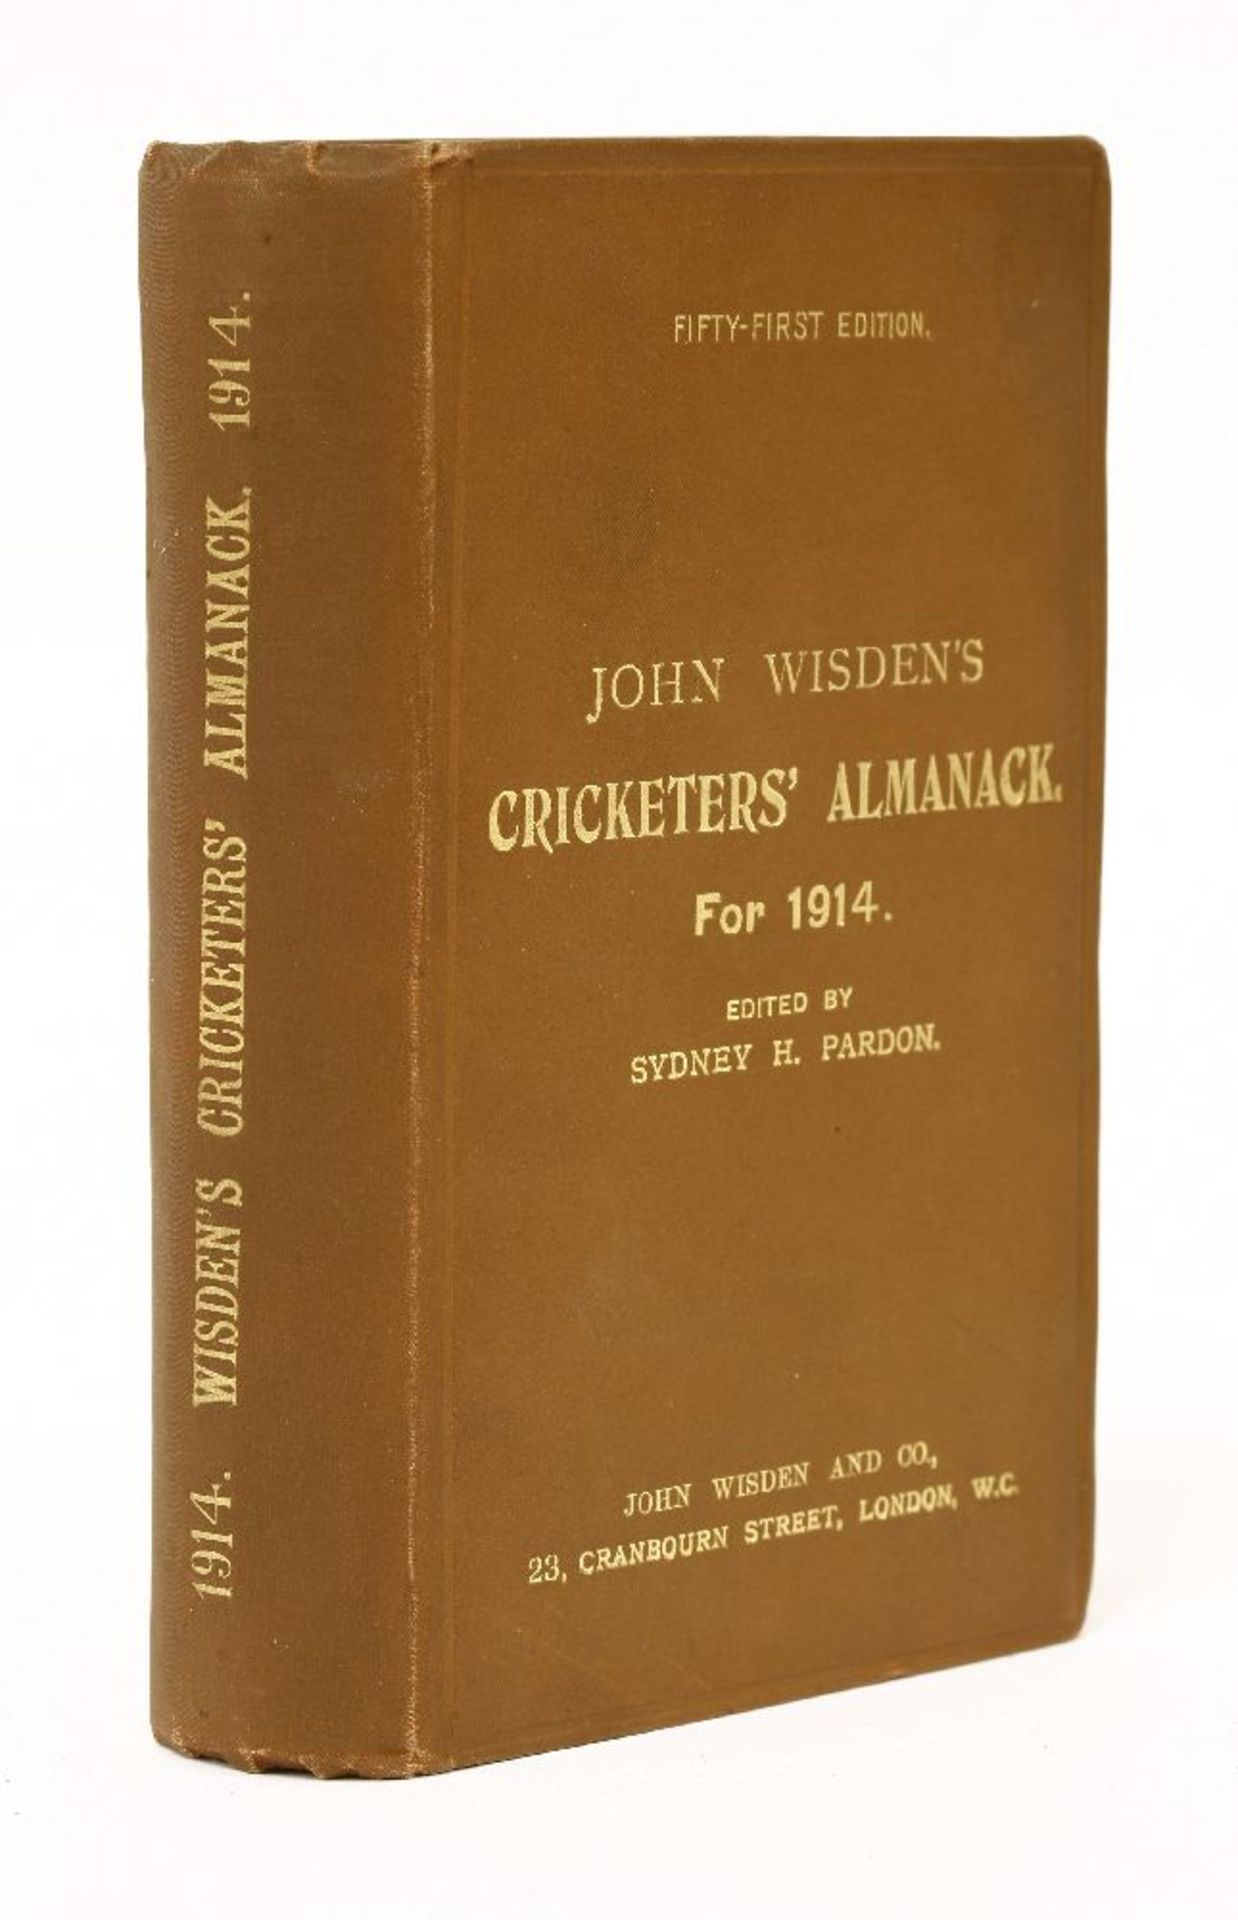 Wisden's Cricketers' Almanack: 1914 (51st. year). Original brown cloth. PP: iv, 543. the plate looks